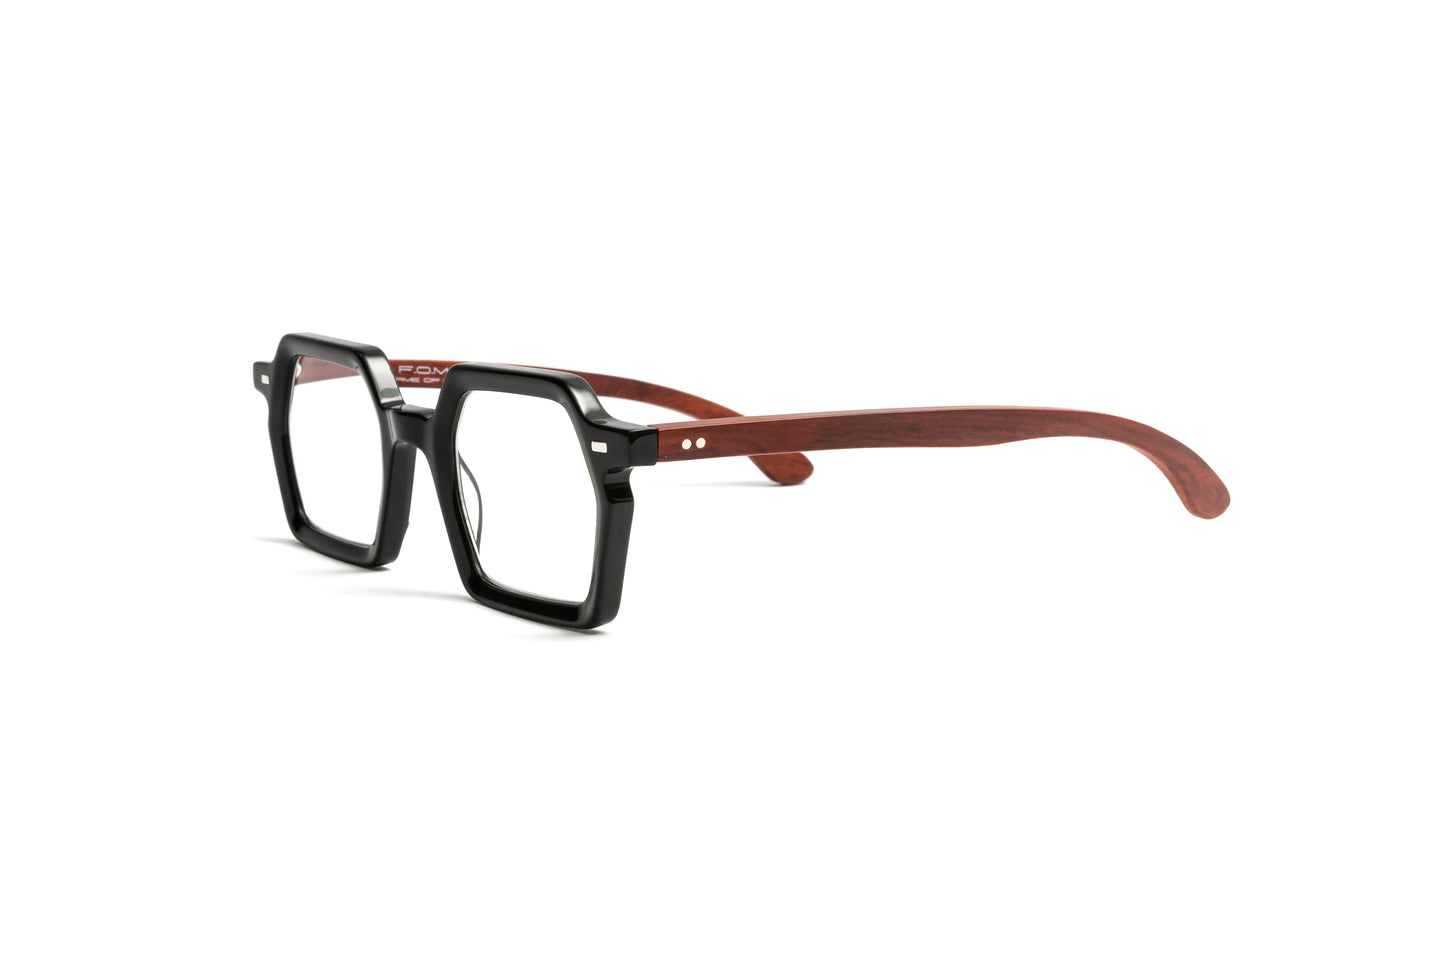 Black acetate square reading glasses with cherry wood temples for men and women by Eyejets